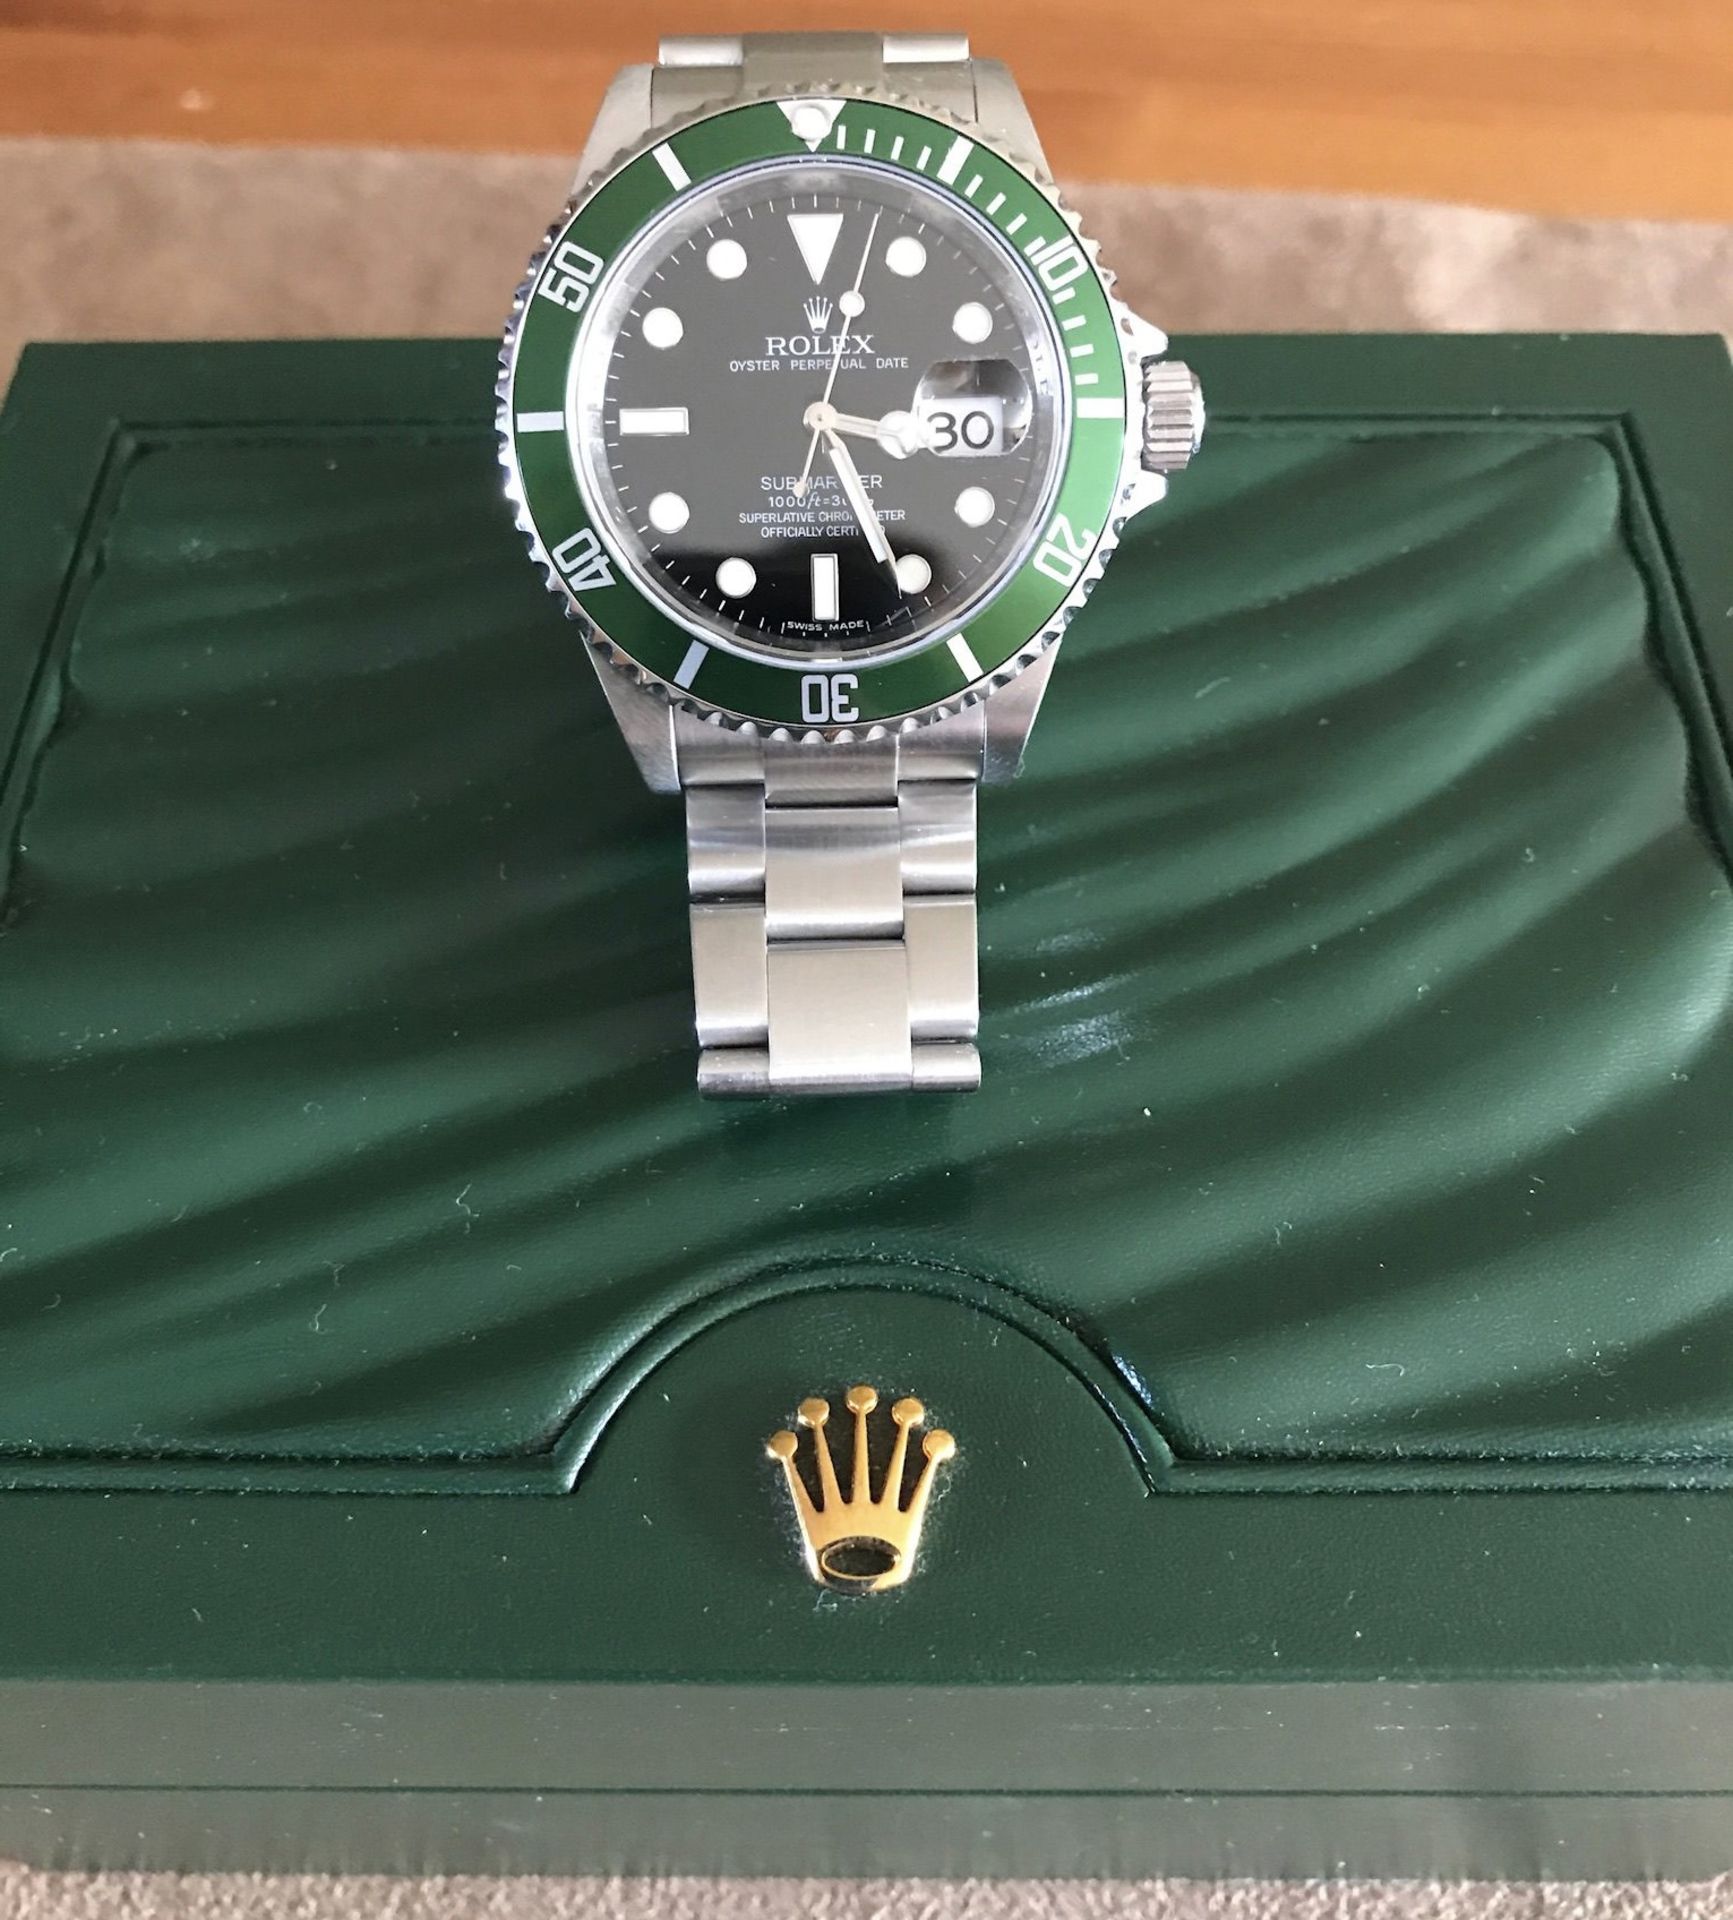 ROLEX SUBMARINER 50TH ANNIVERSARY (KERMIT) LIMITED SERIES - Image 9 of 10